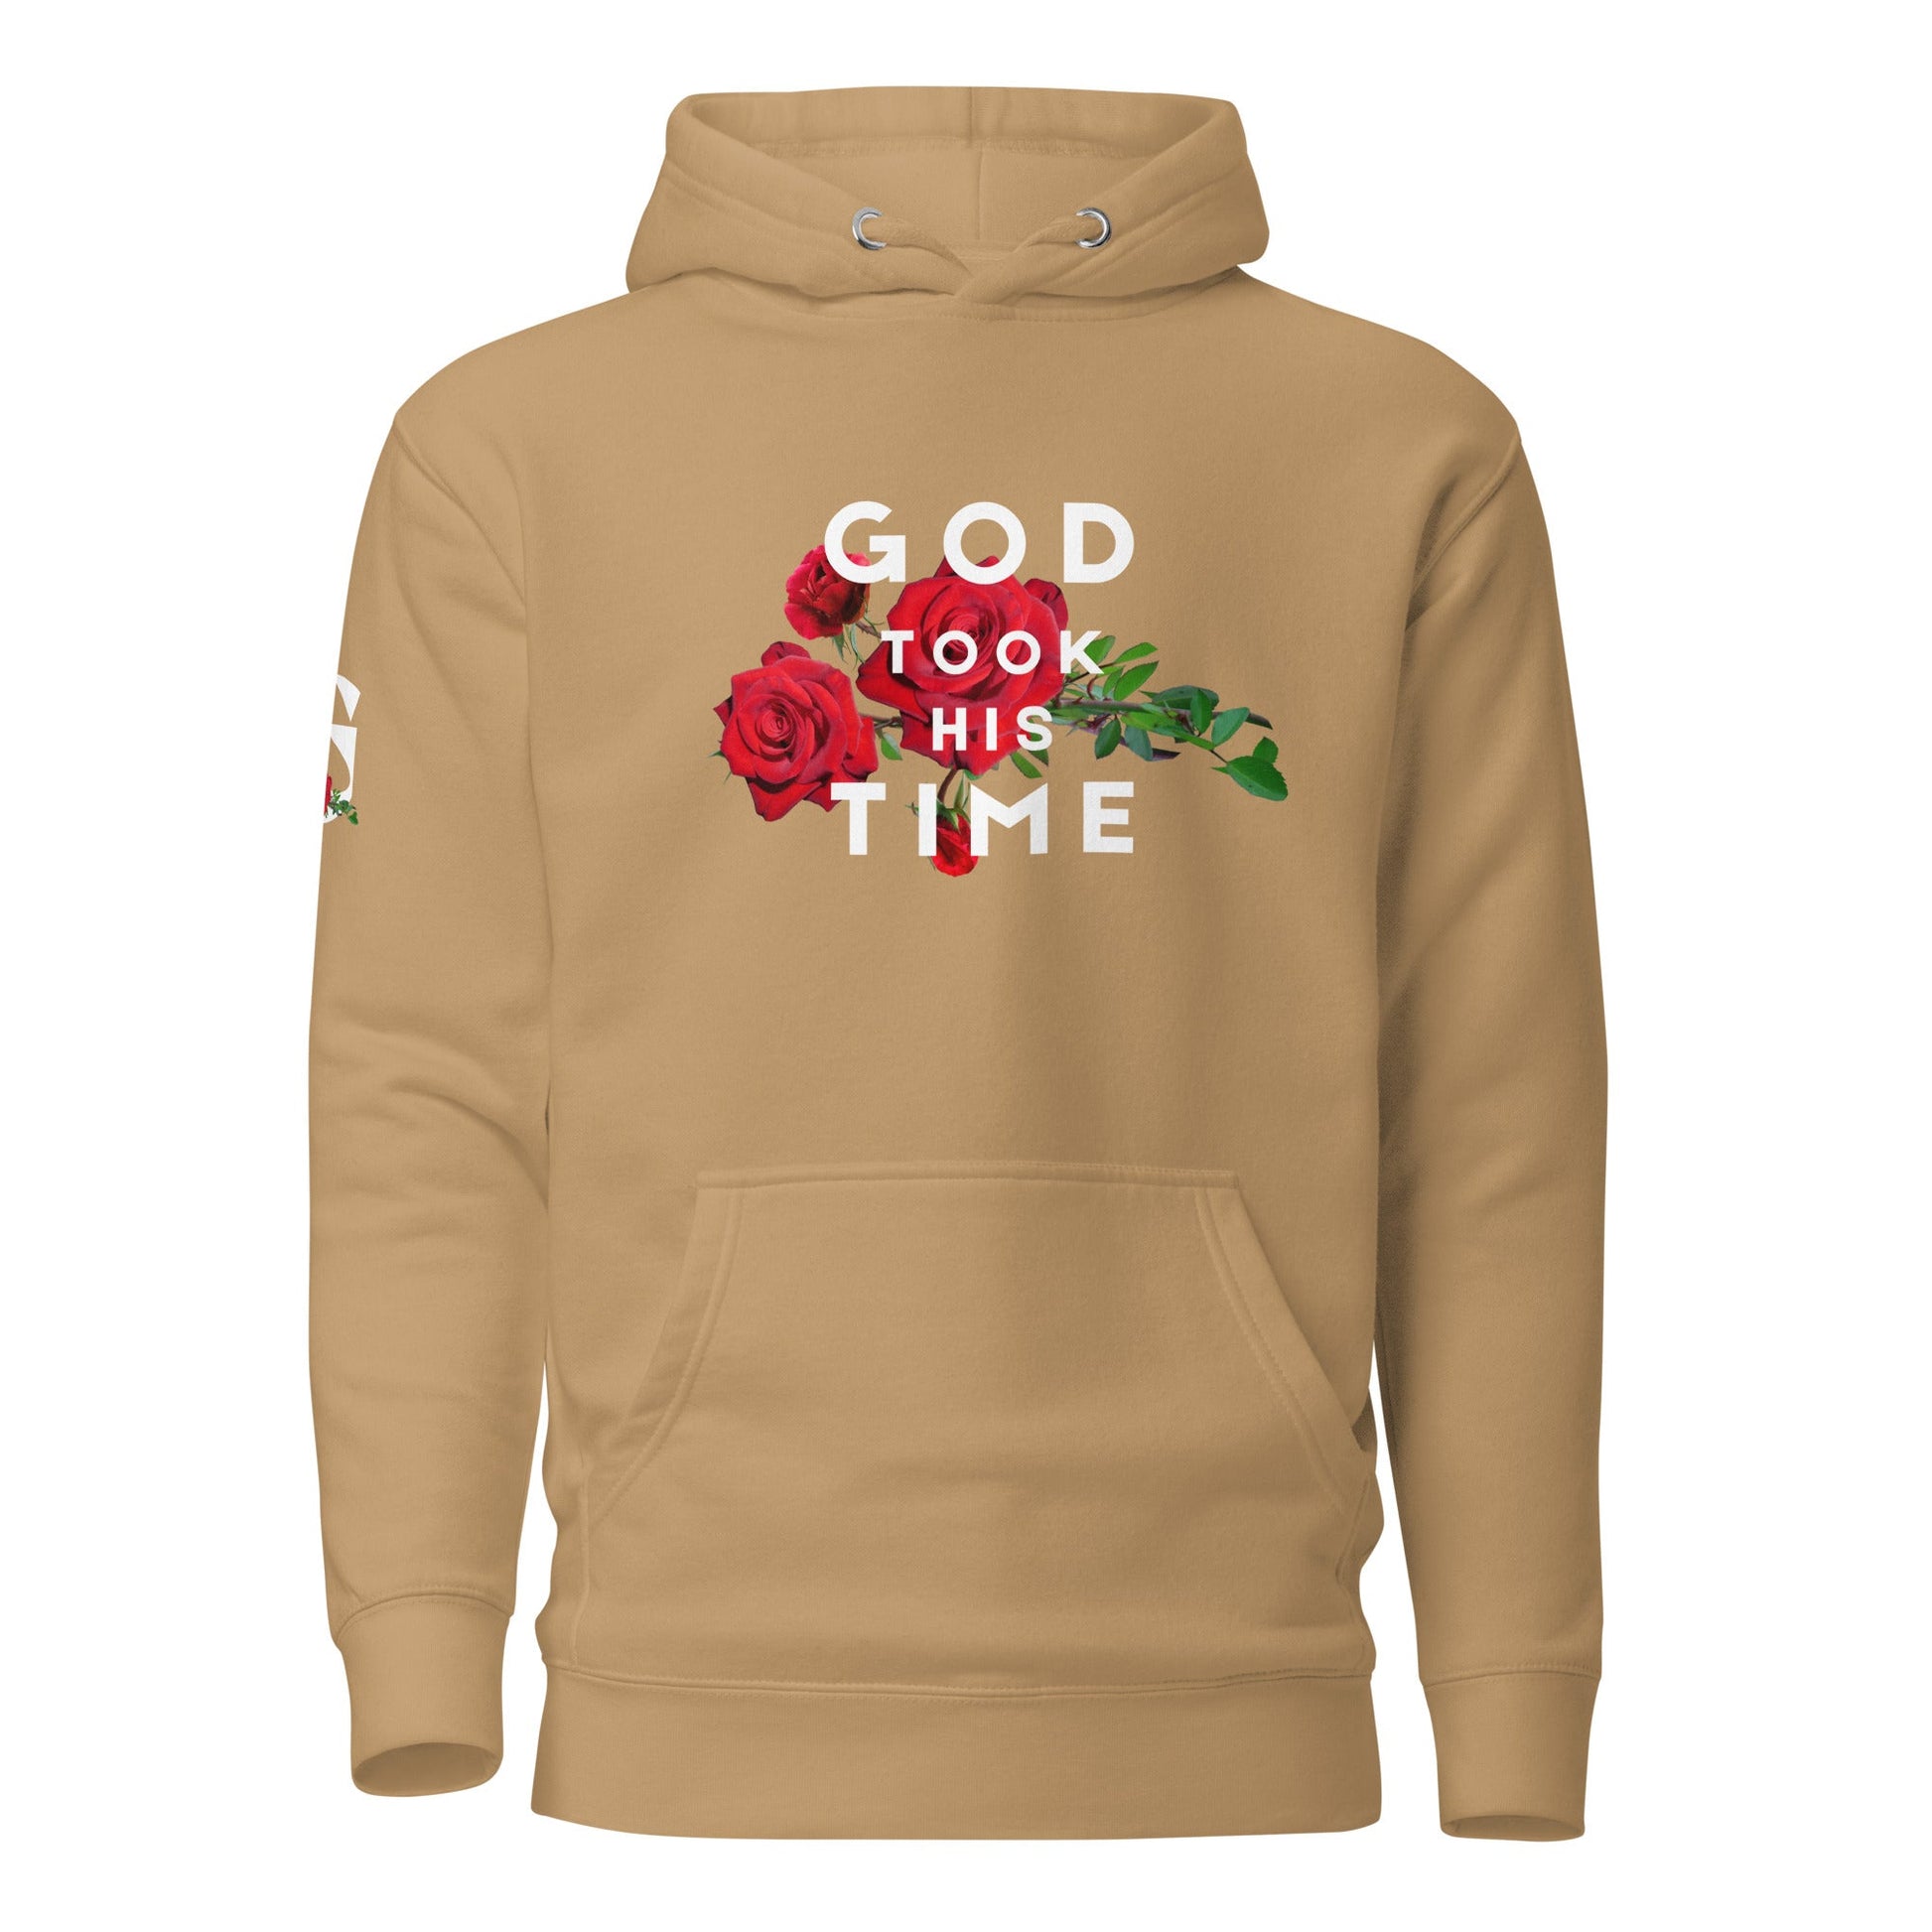 God took his time Unisex Hoodie - Catch This Tea Shirts